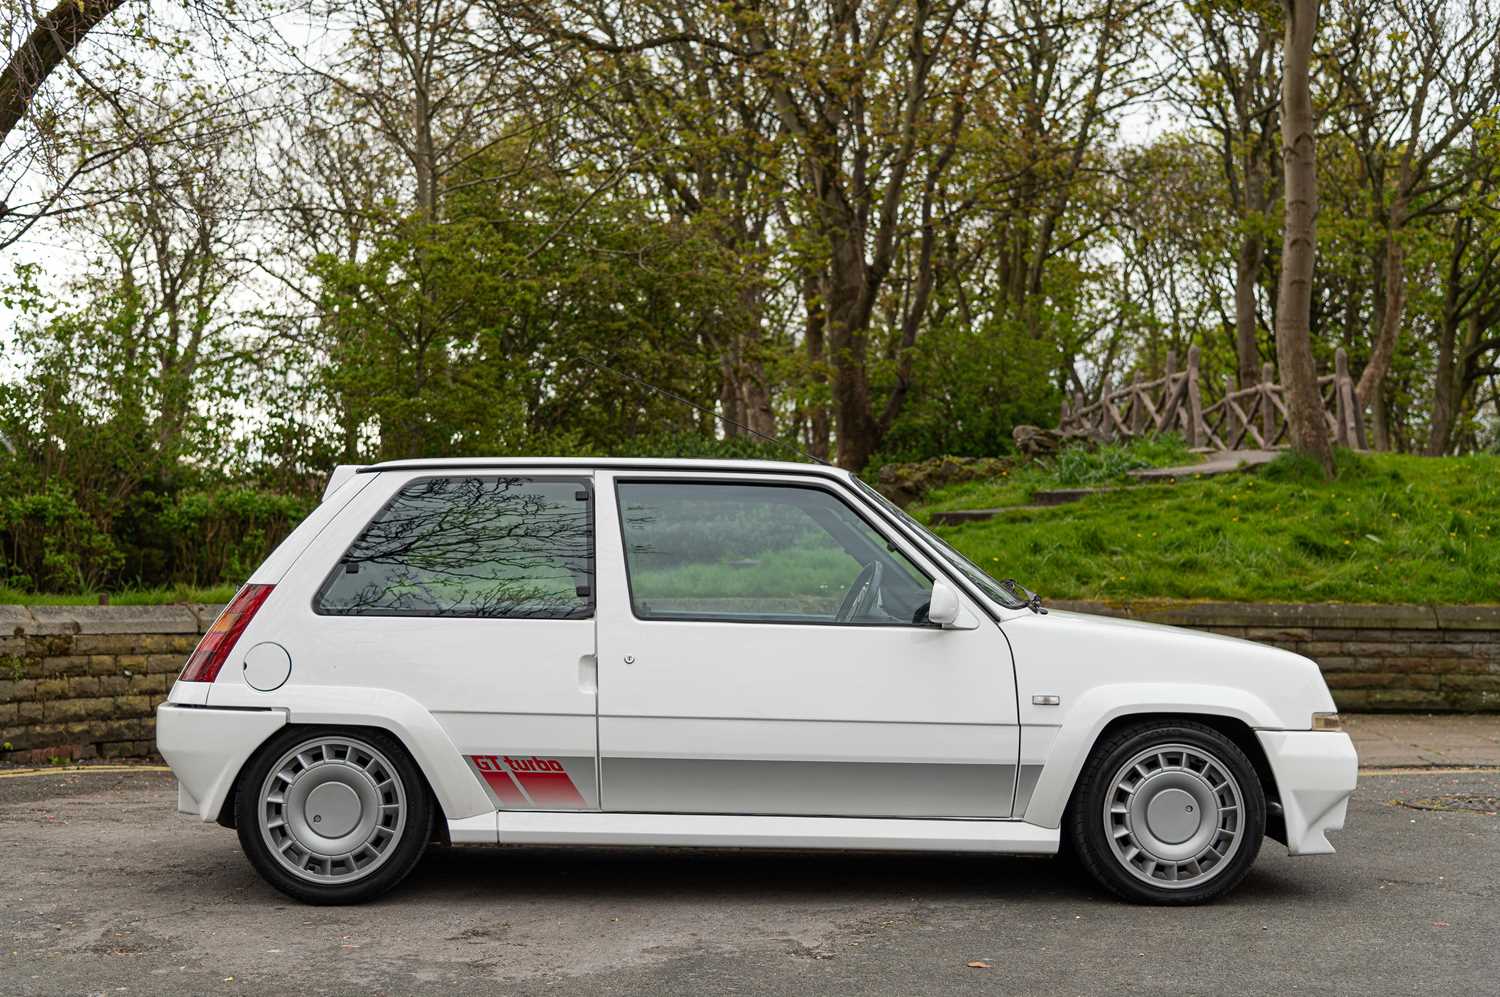 1990 Renault 5 GT Turbo - Image 9 of 79